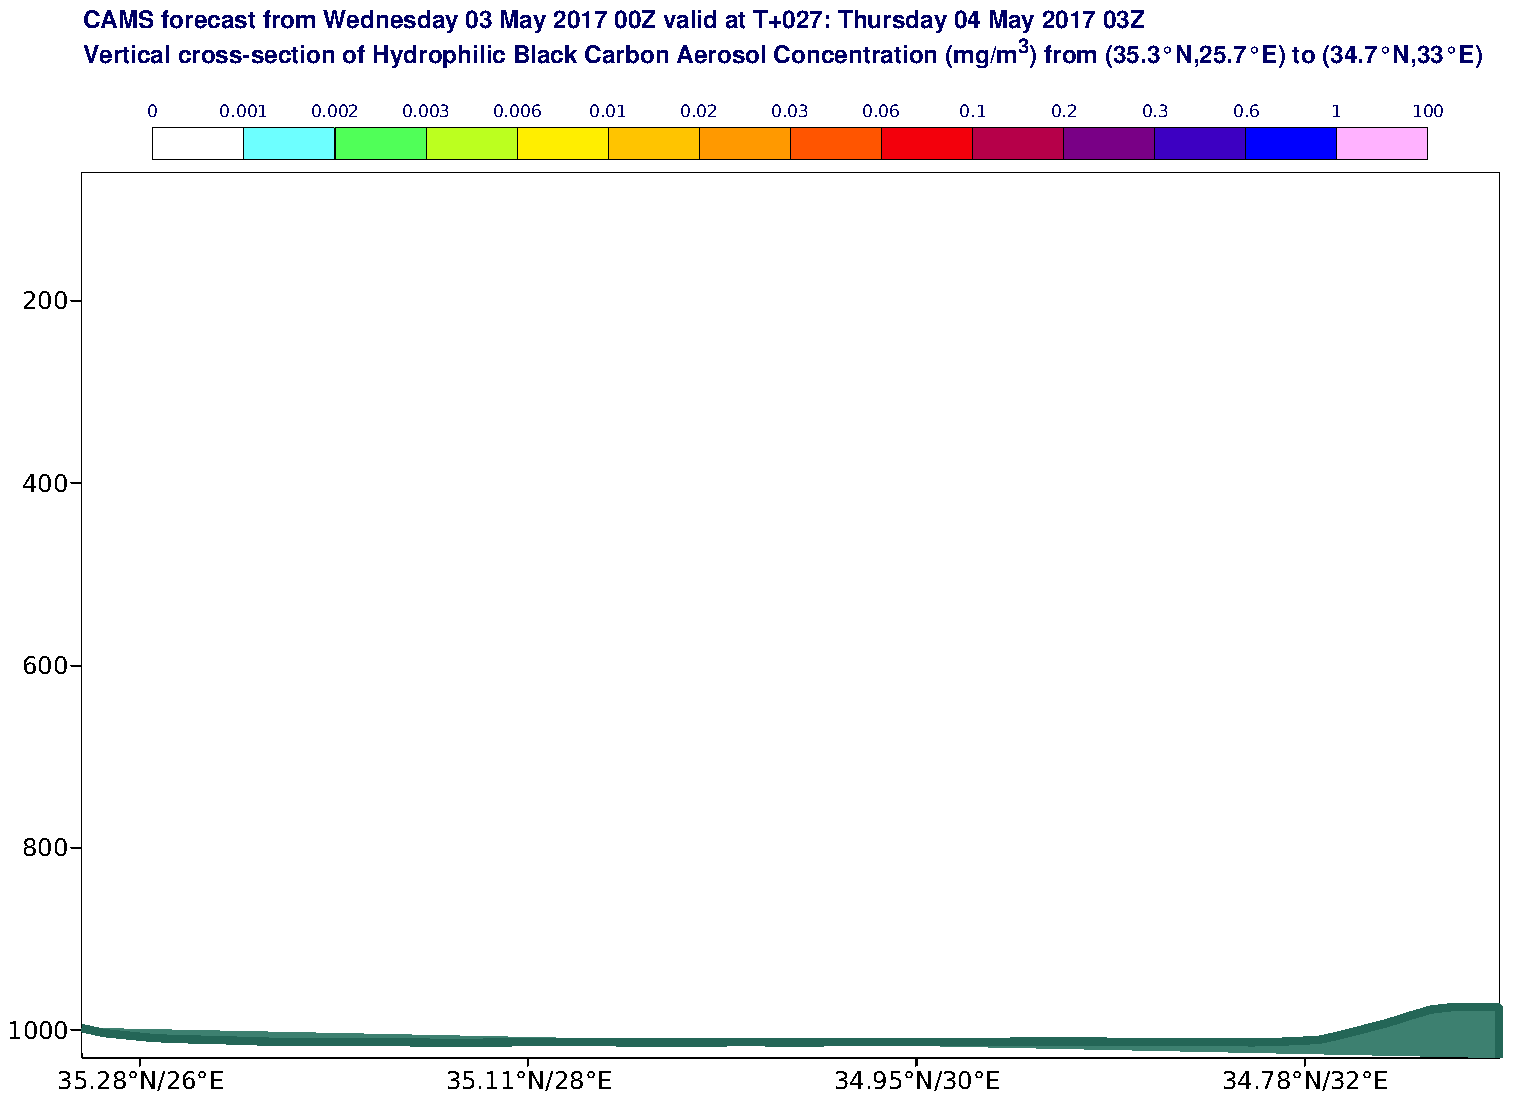 Vertical cross-section of Hydrophilic Black Carbon Aerosol Concentration (mg/m3) valid at T27 - 2017-05-04 03:00